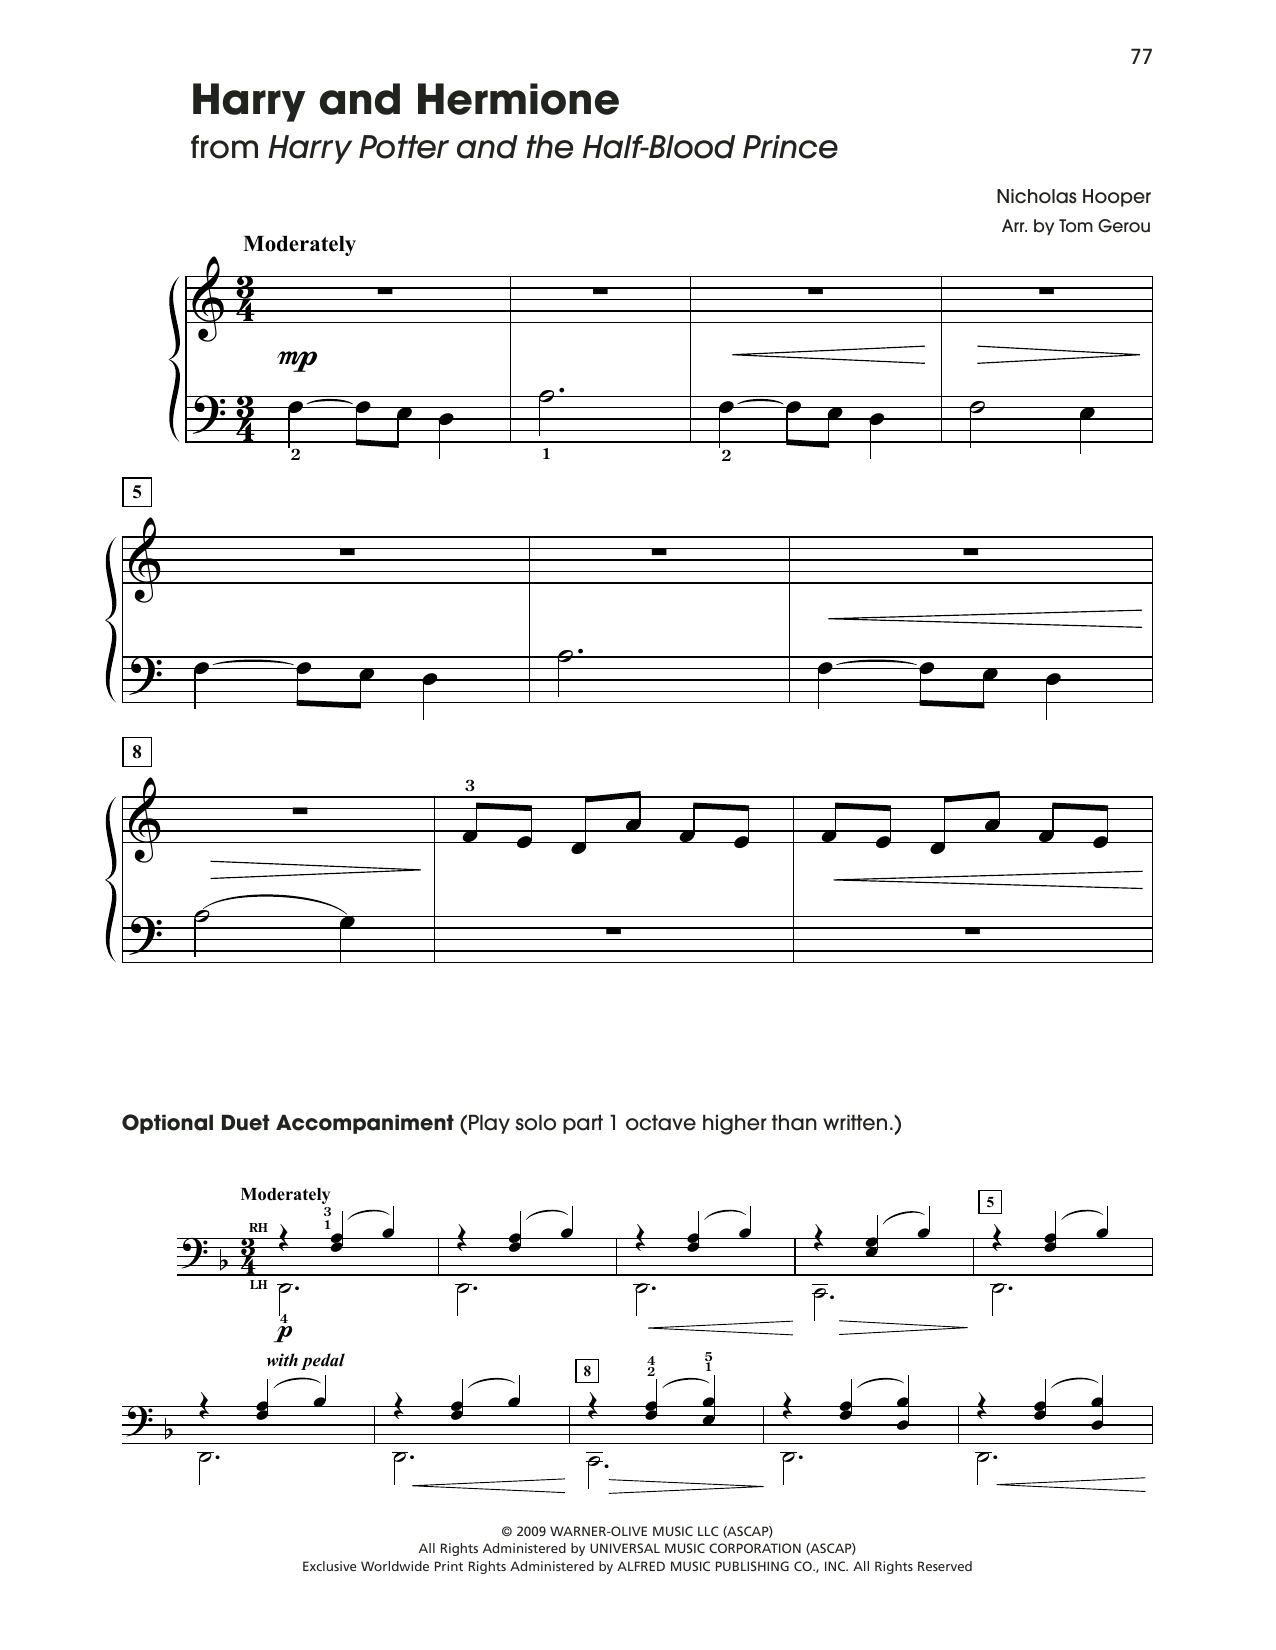 Download Nicholas Hooper Harry & Hermione (from Harry Potter) (a Sheet Music